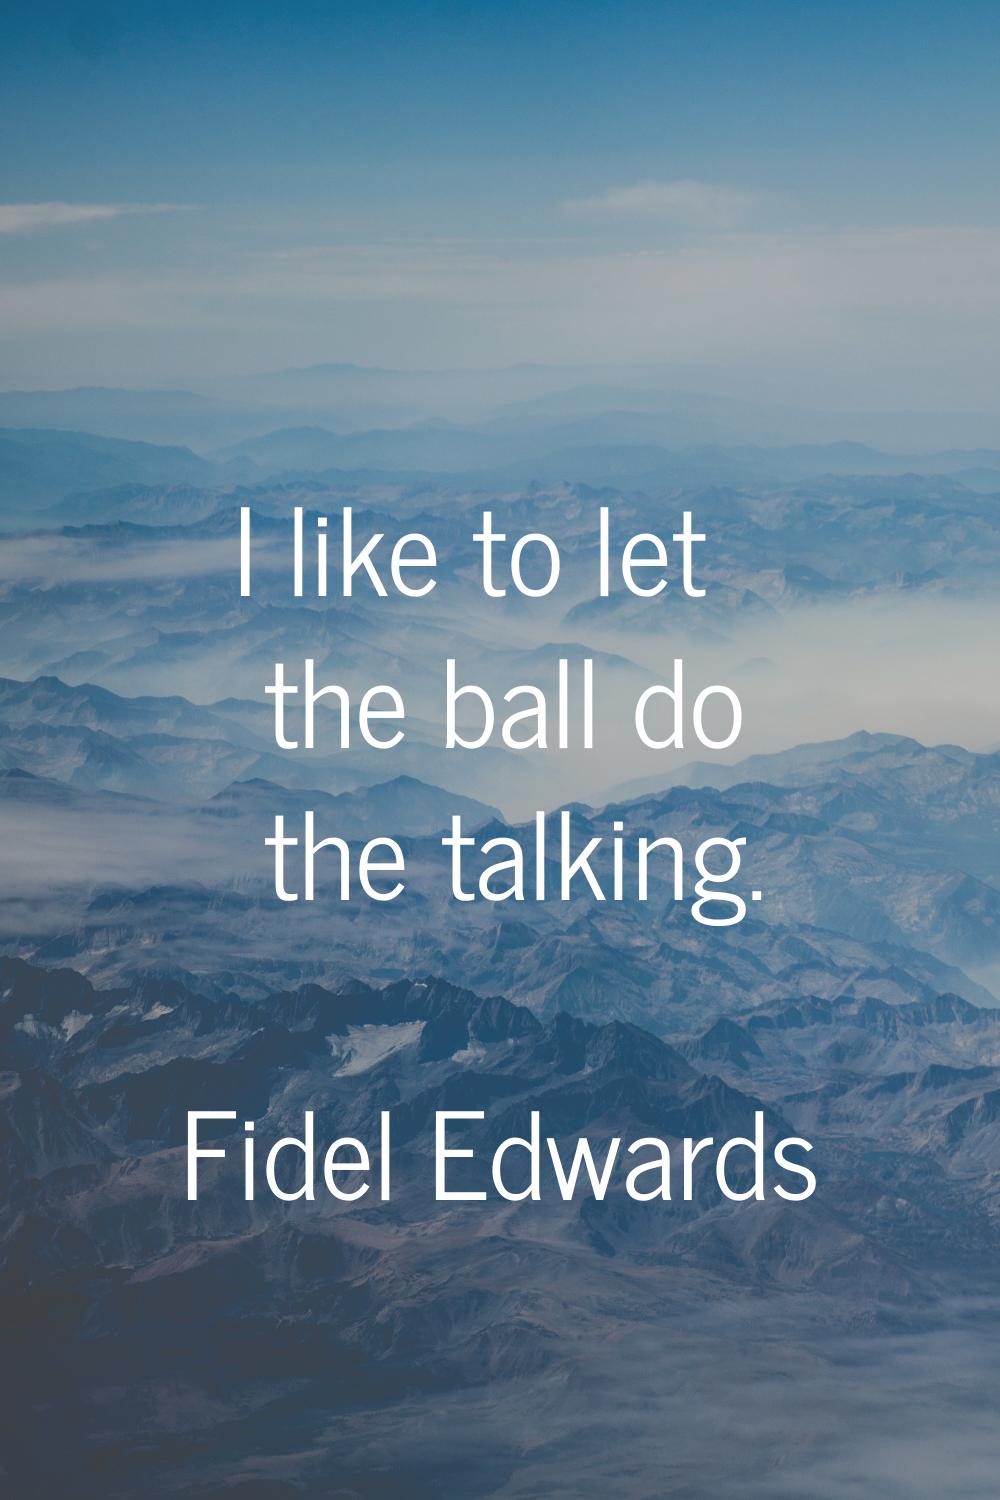 I like to let the ball do the talking.